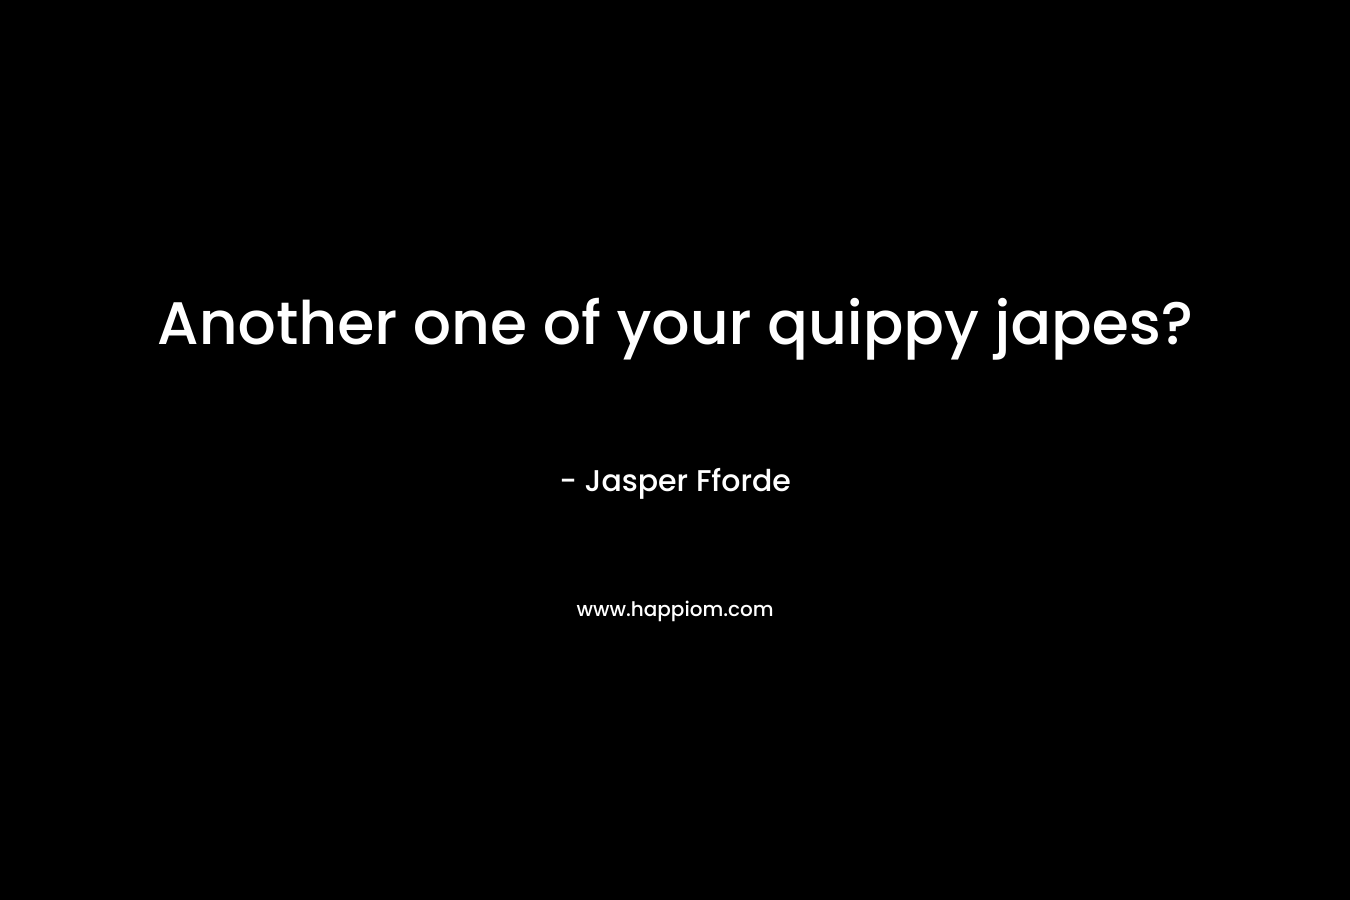 Another one of your quippy japes? – Jasper Fforde